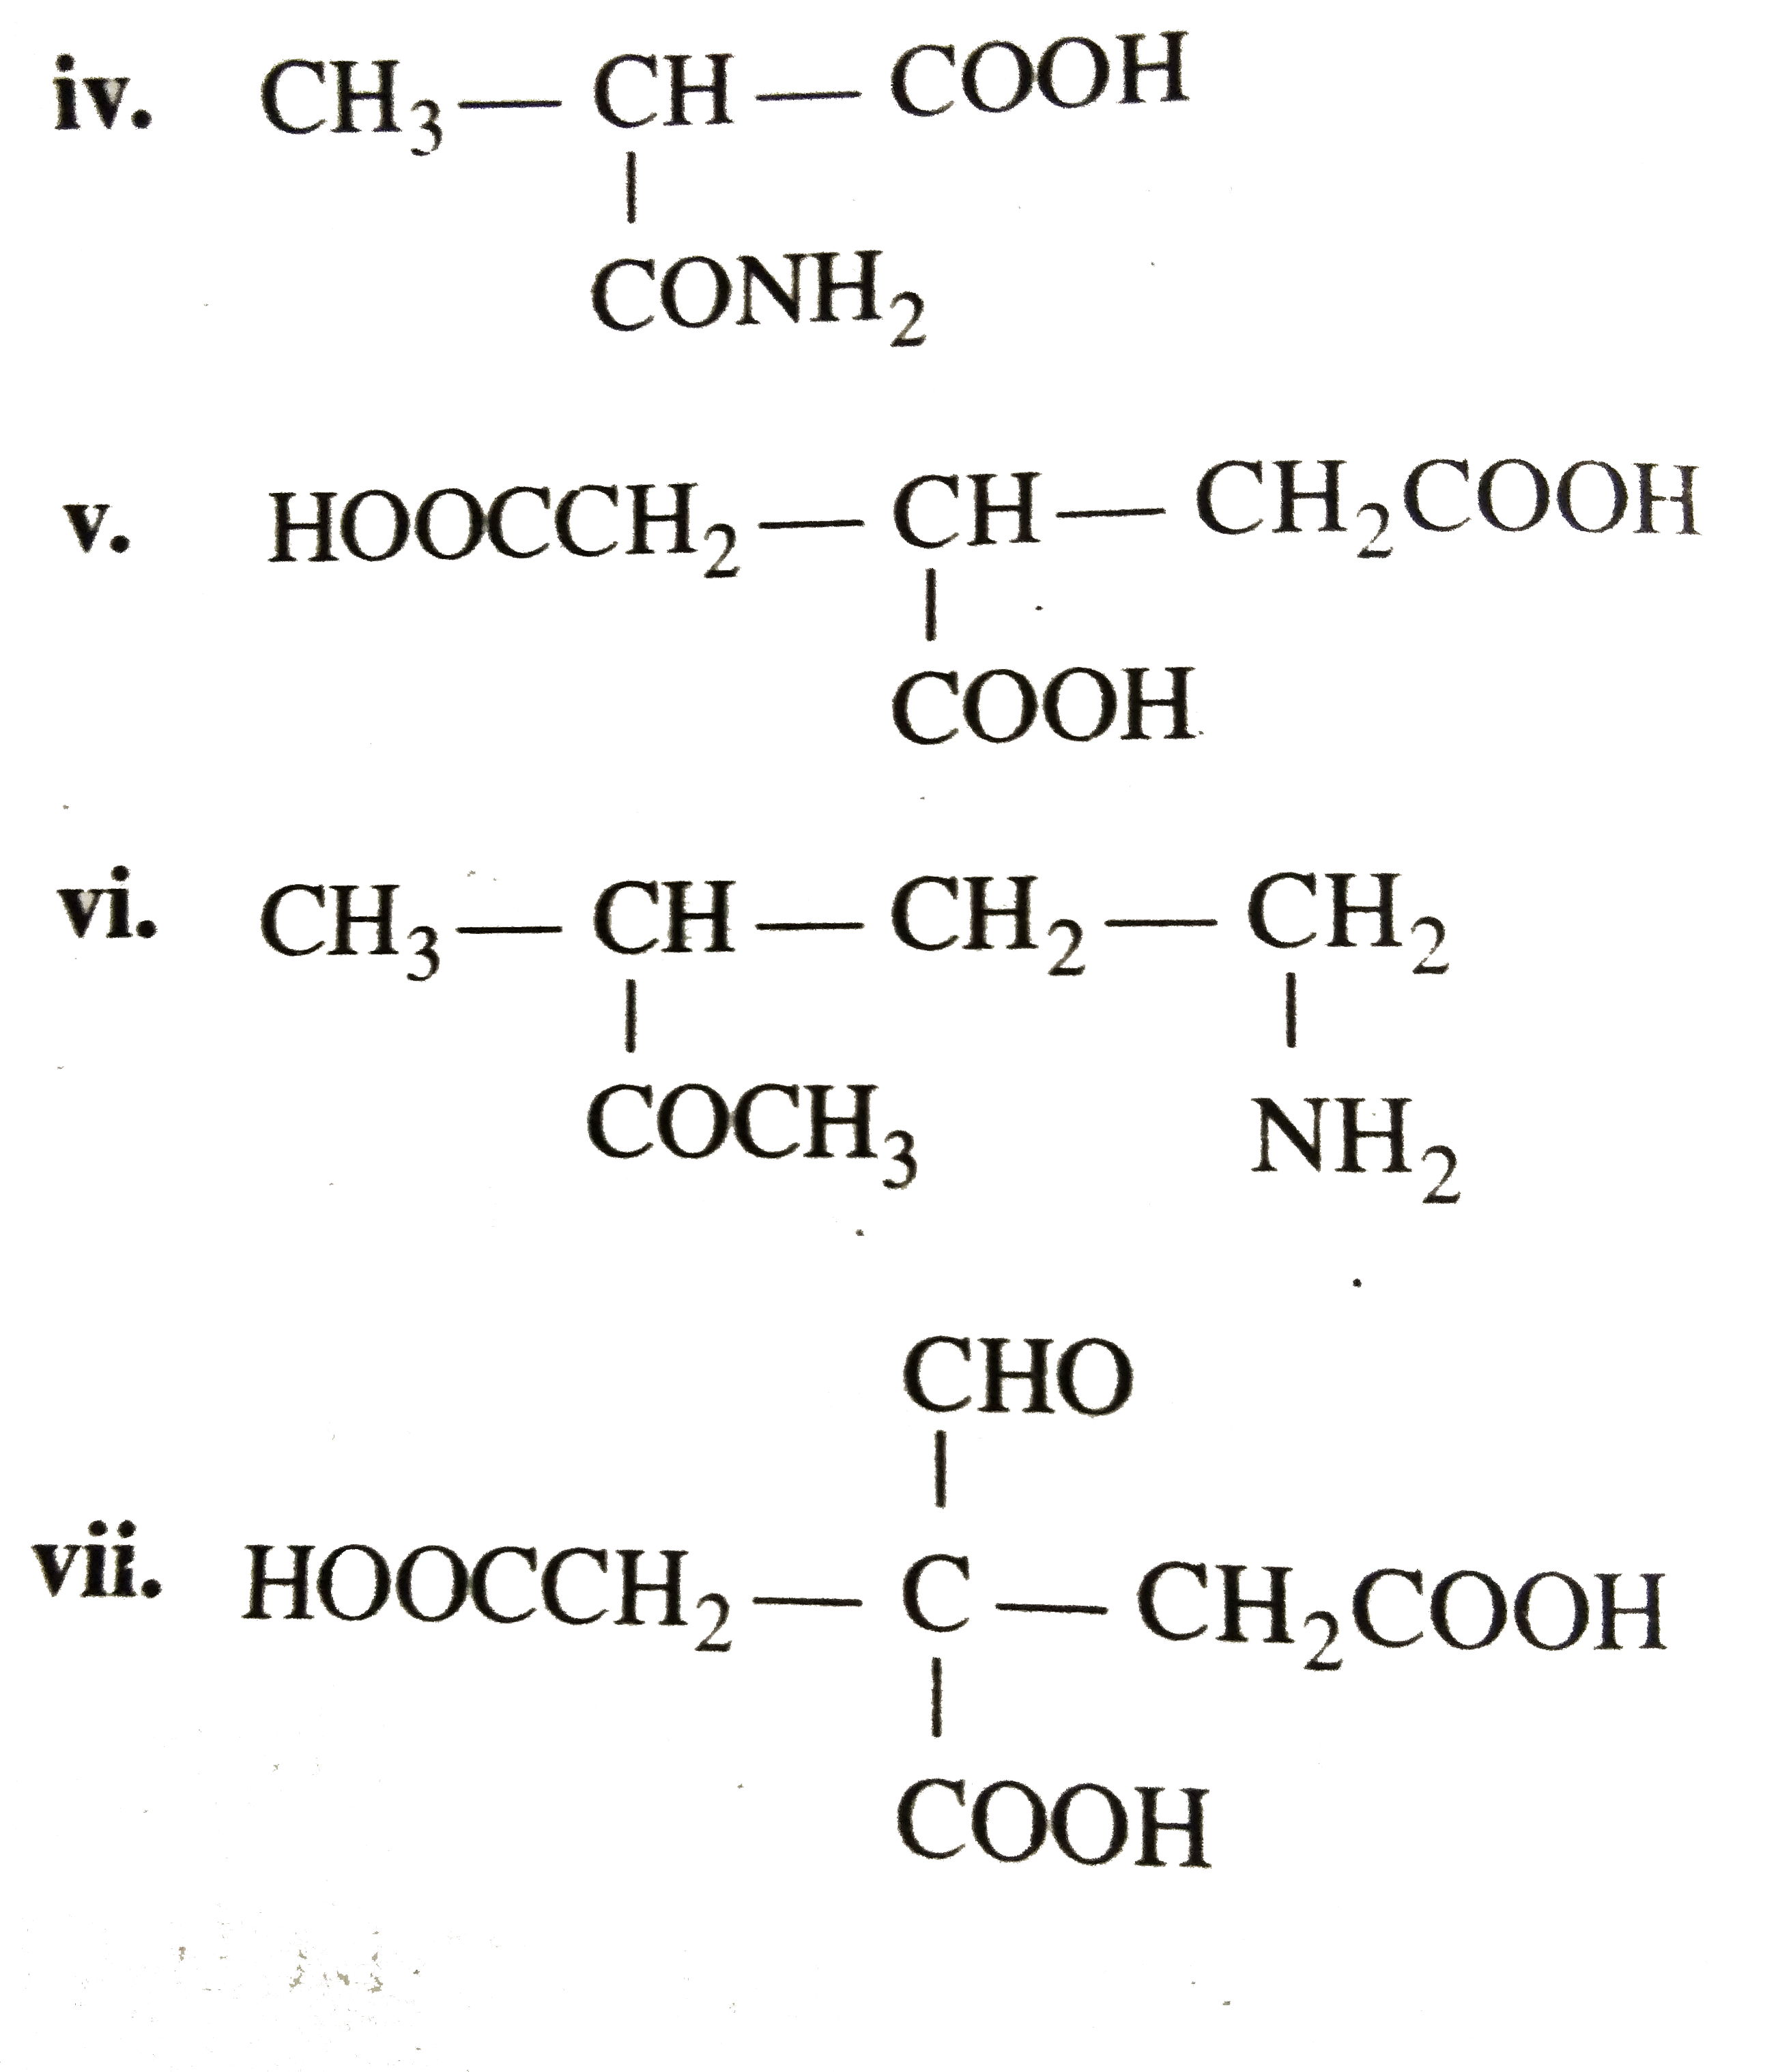 Give the IUPAC names for the following polyfunctional compounds:   i. CH(3)CH(2)O-CH(2)-CHOH-CH(3)   ii. CH(3)-underset(NO(2))undereset(|)(C )N-CH(2)-underset(OH)underset(|)overset(CH(3))overset(|)(C )-CH(3)   iii. CH(2)=overset(H(3)C)overset(|)(C )-overset(OH)overset(|)(C )H-CH(2)CN